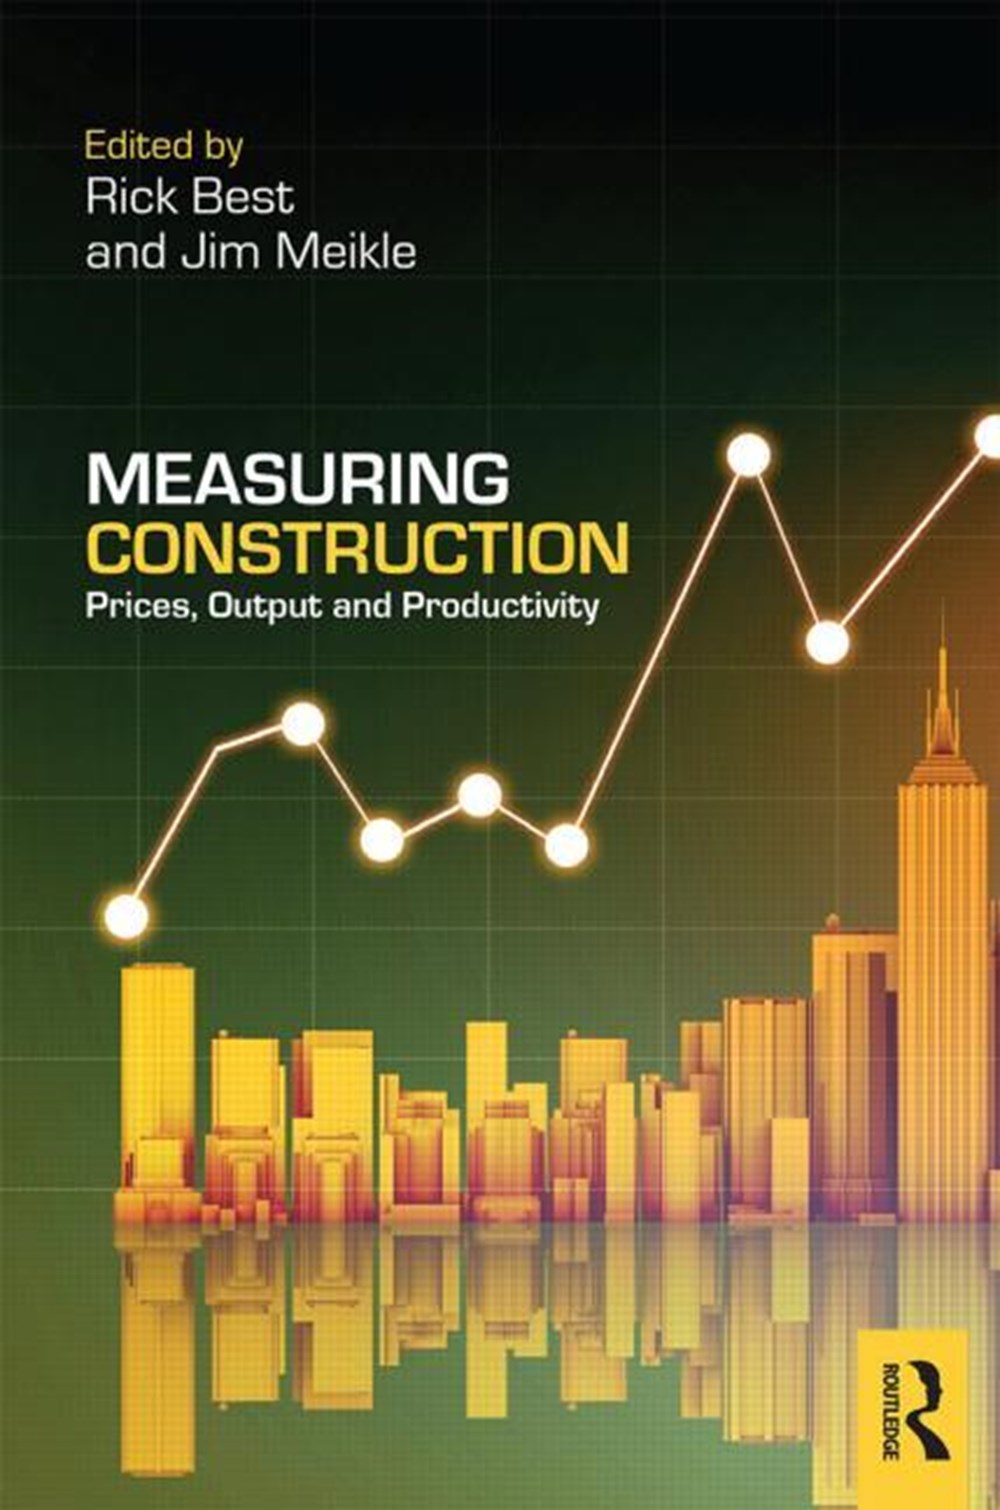 Measuring Construction: Prices, Output and Productivity